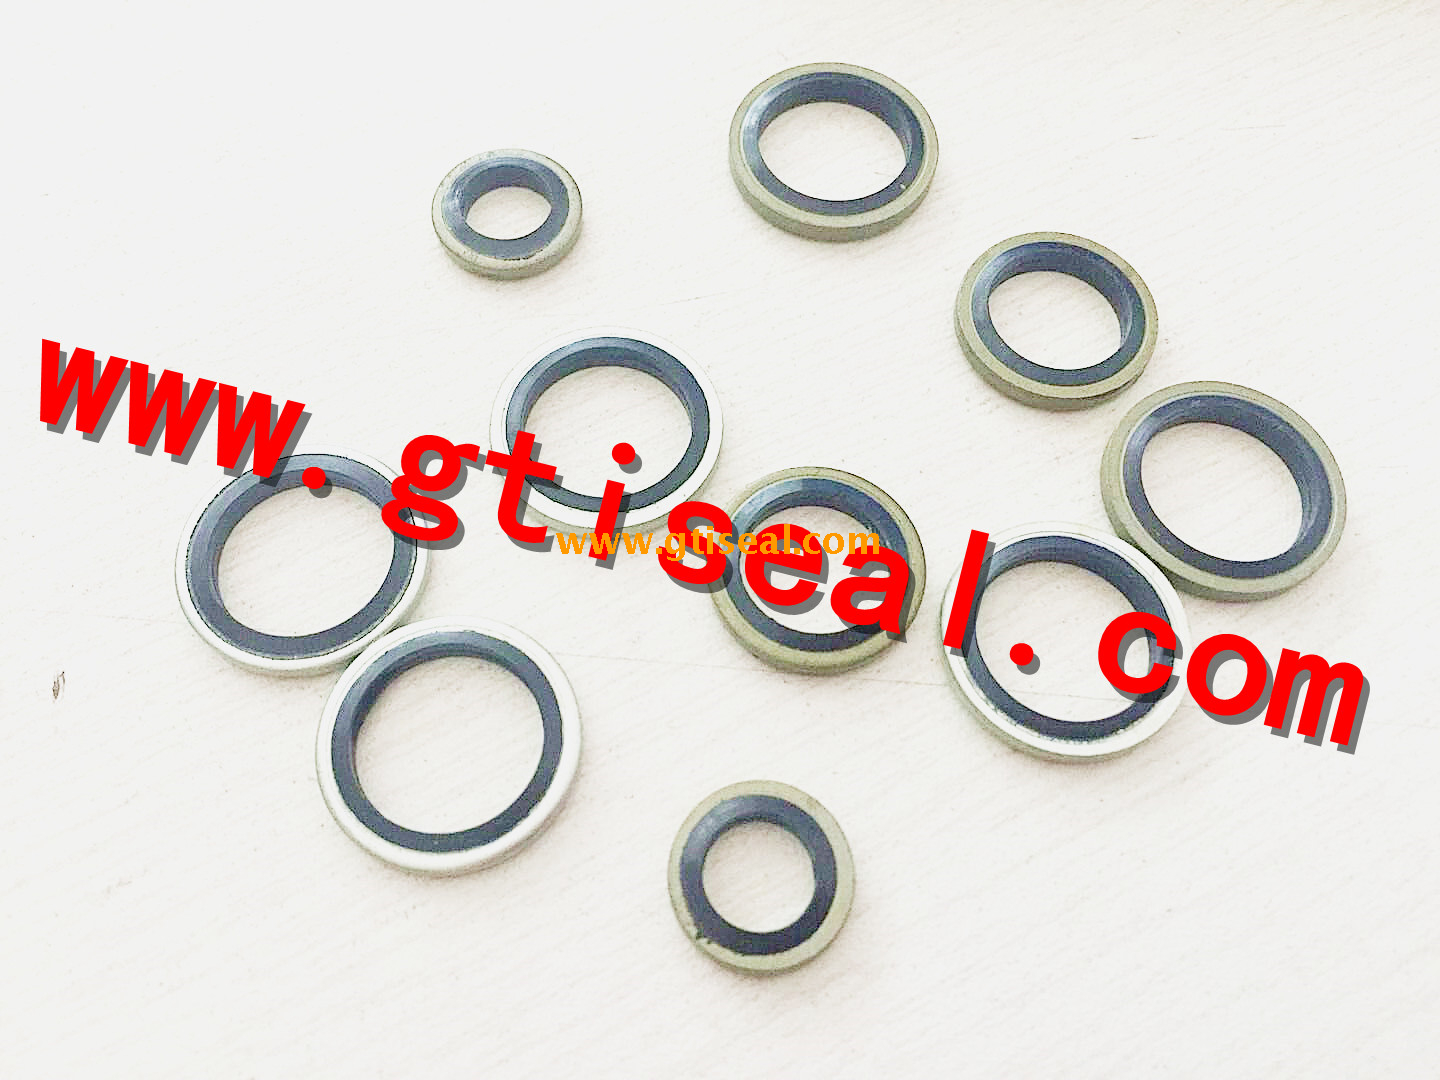 Bonded washer/Bonded gasket for auto products